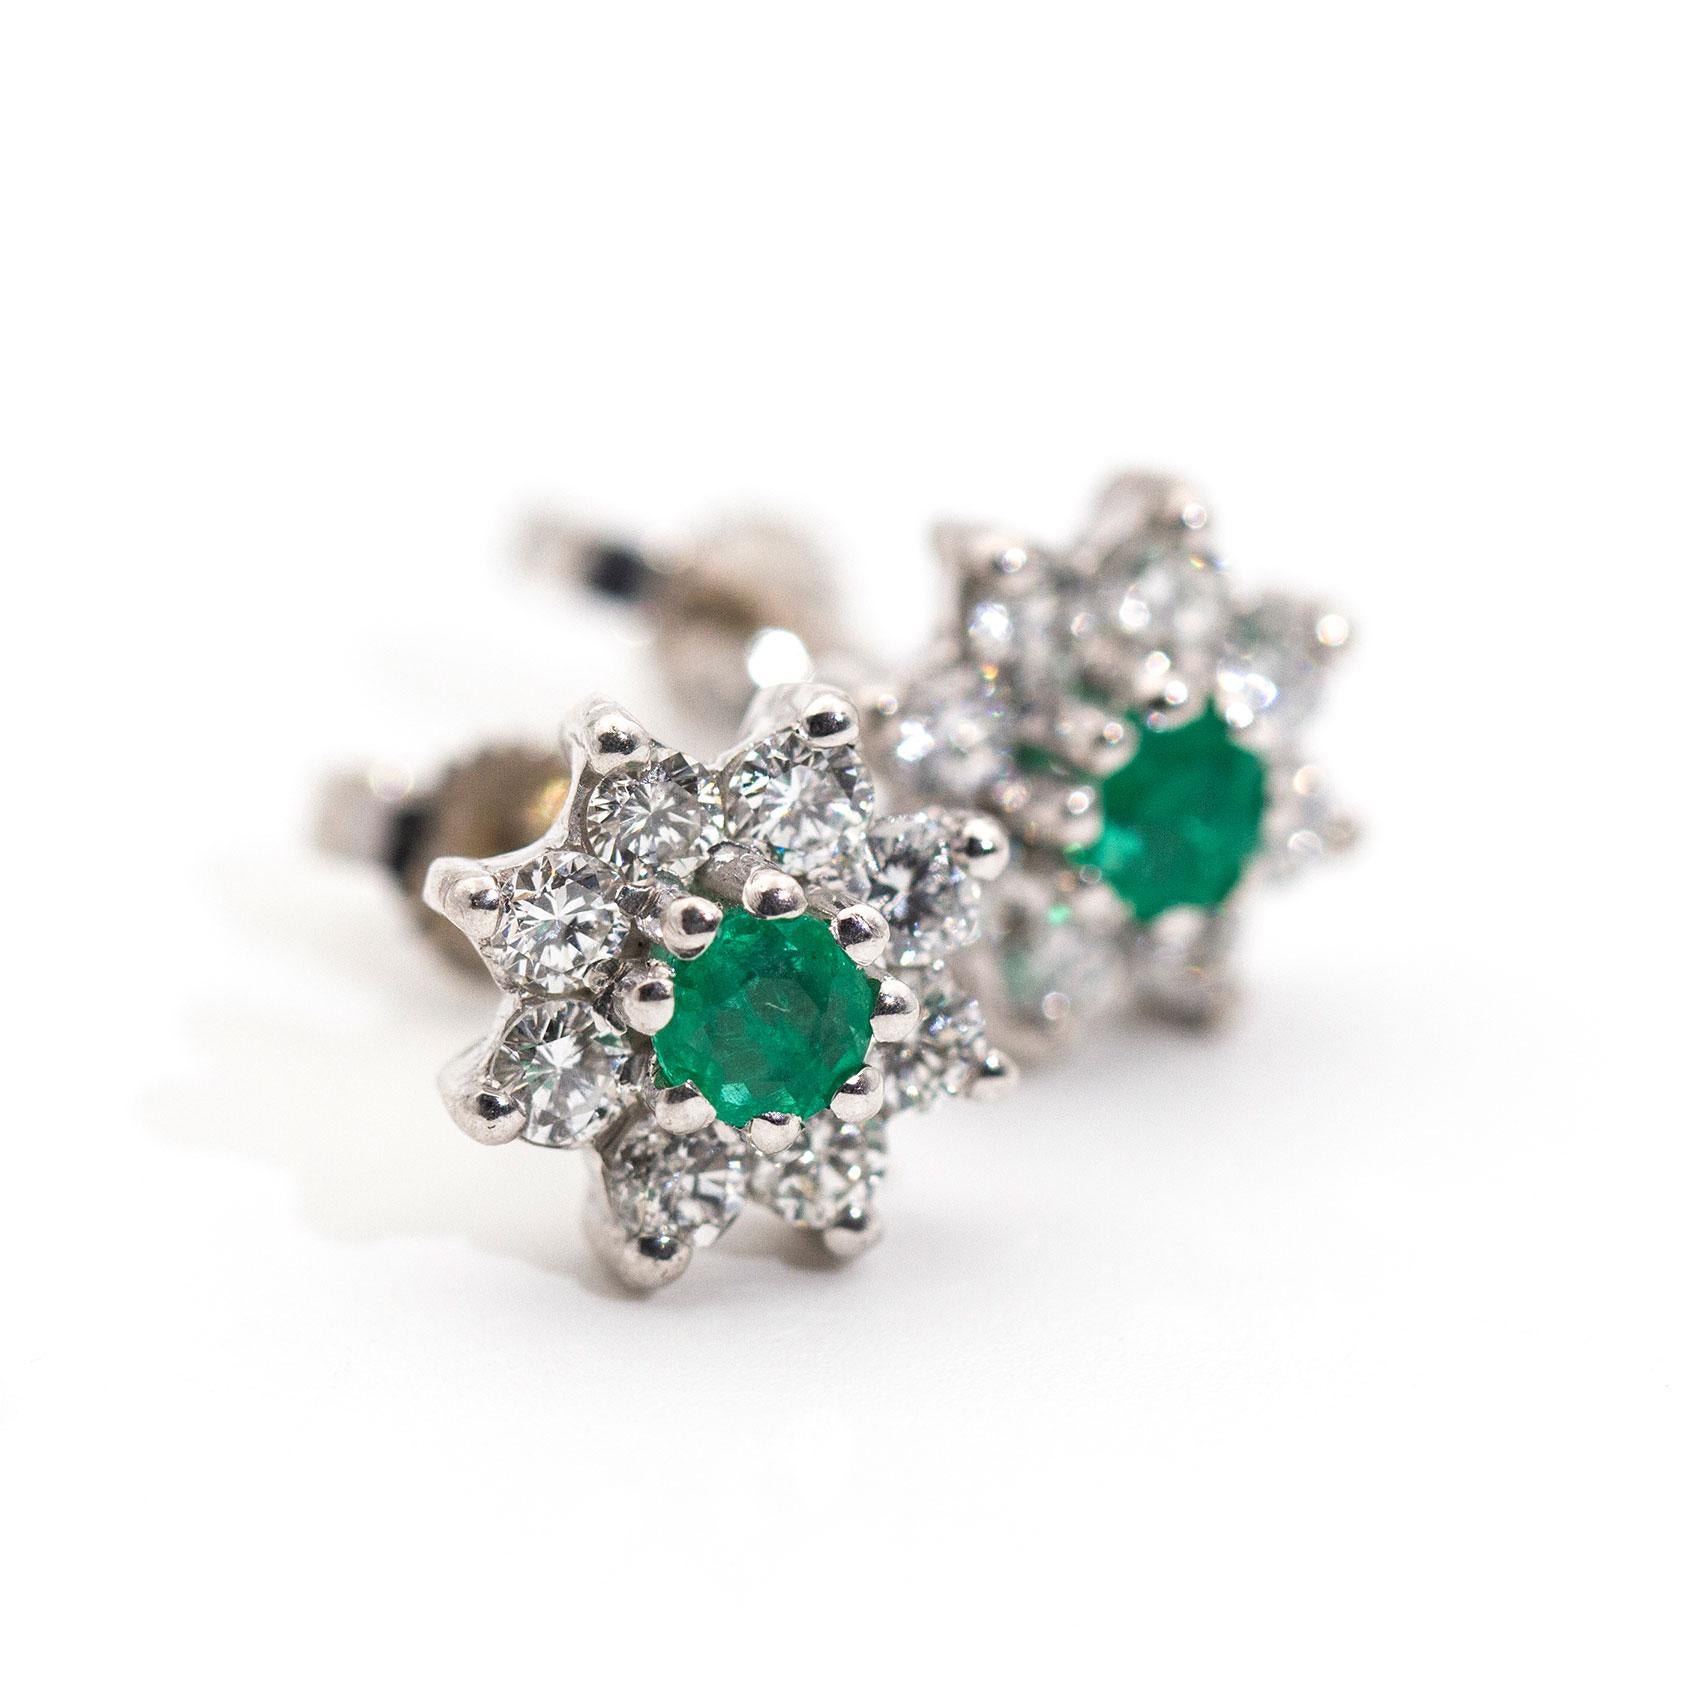 These timeless cluster stud earrings are forged in 18ct white gold and each earring features a beautiful bright round green emerald each encompassed by sparkling round brilliant cut diamonds. We have named this pair of gorgeous vintage splendour The